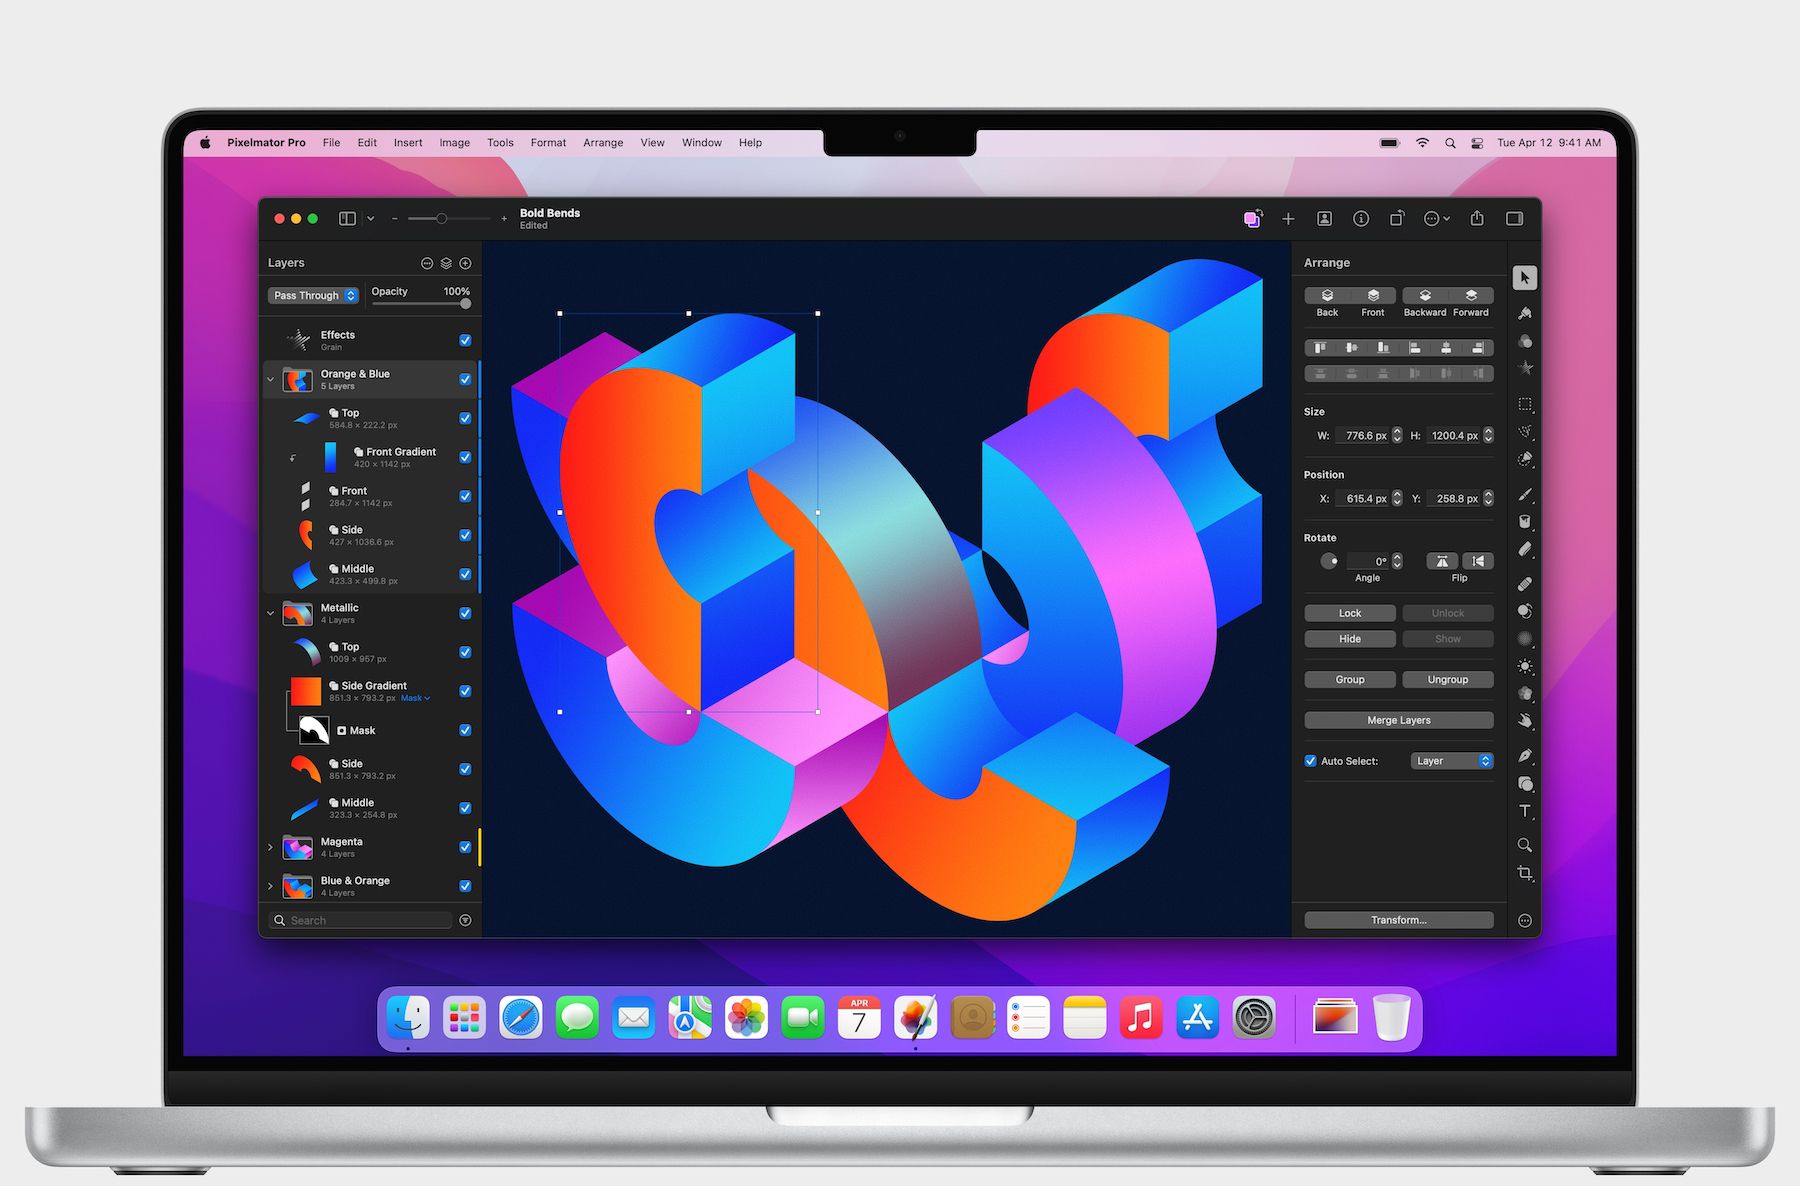 Pixelmator Pro 2.4 Adds New Layer Types, Vector Shapes, M1 Ultra Support, More - macrumors.com